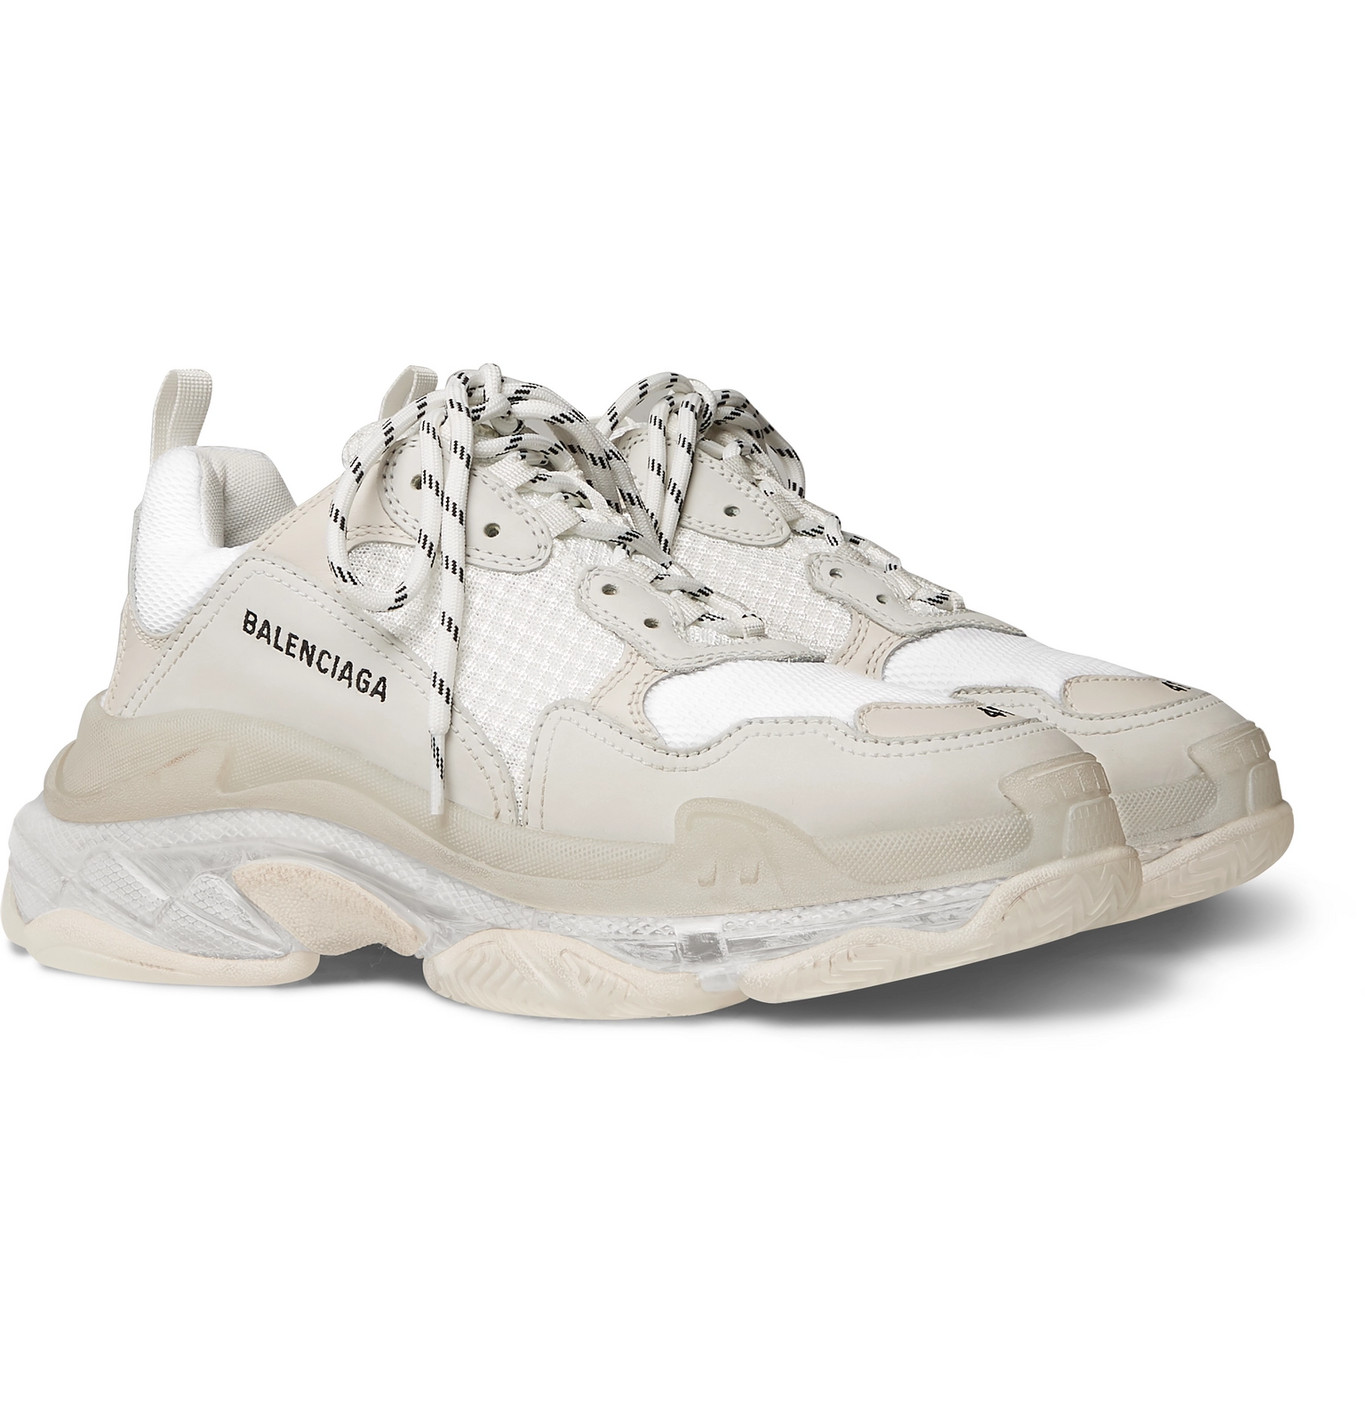 Balenciaga - Triple S Clear Sole Mesh, Nubuck and Leather Sneakers ...